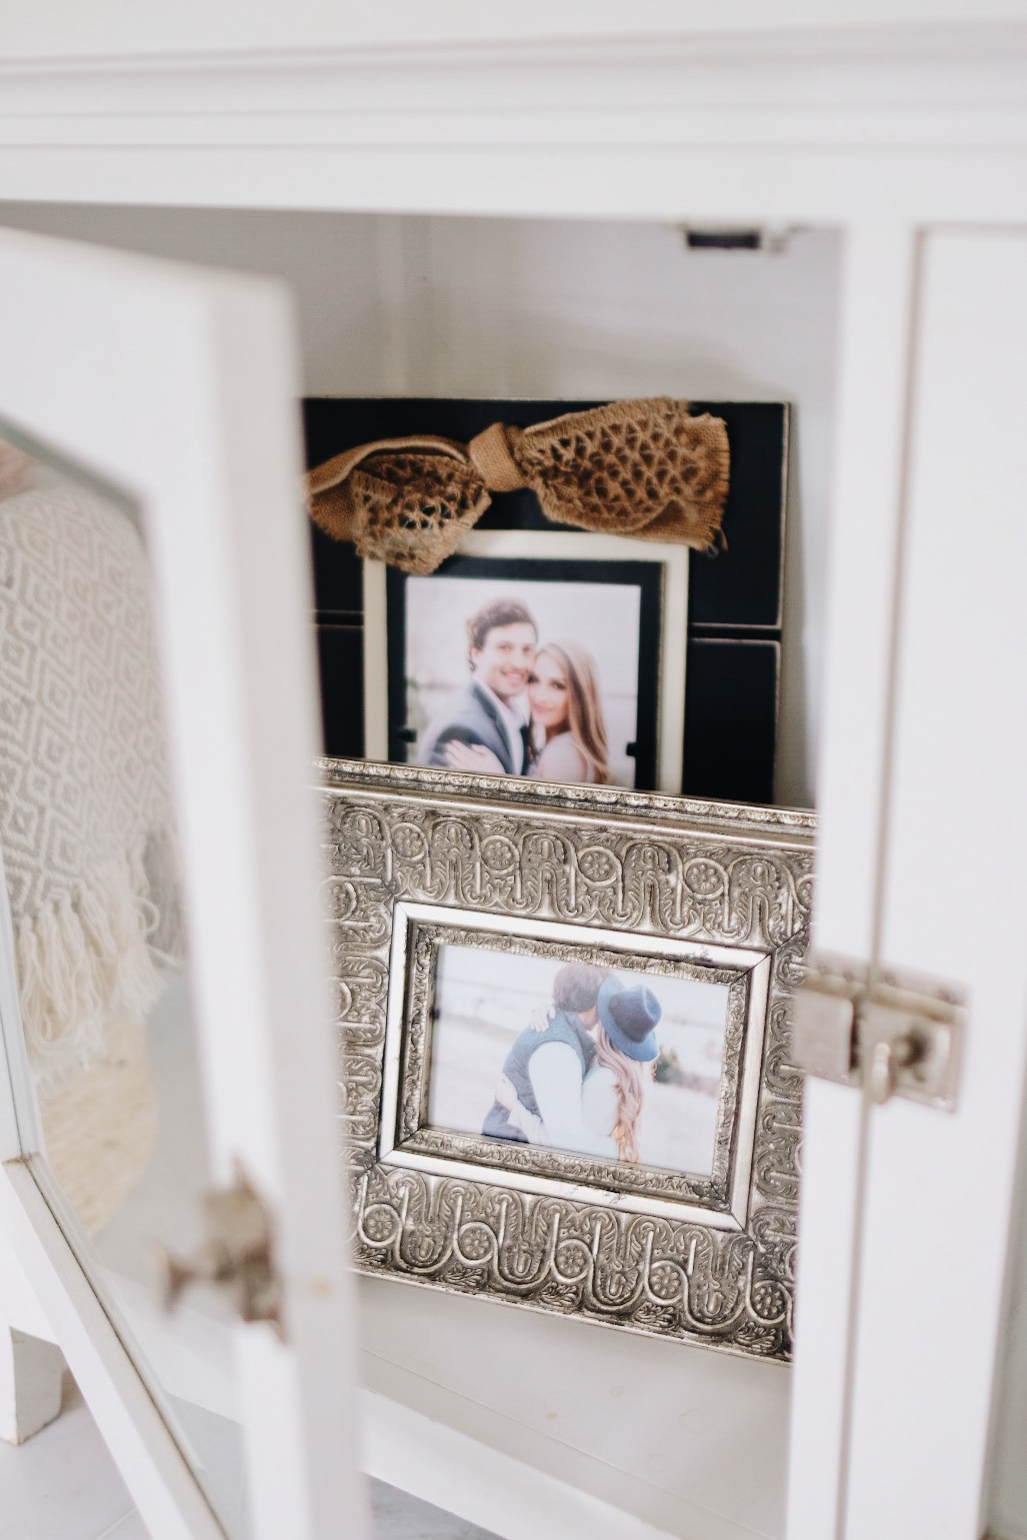 Framed photos in your home | Miss Madeline Rose